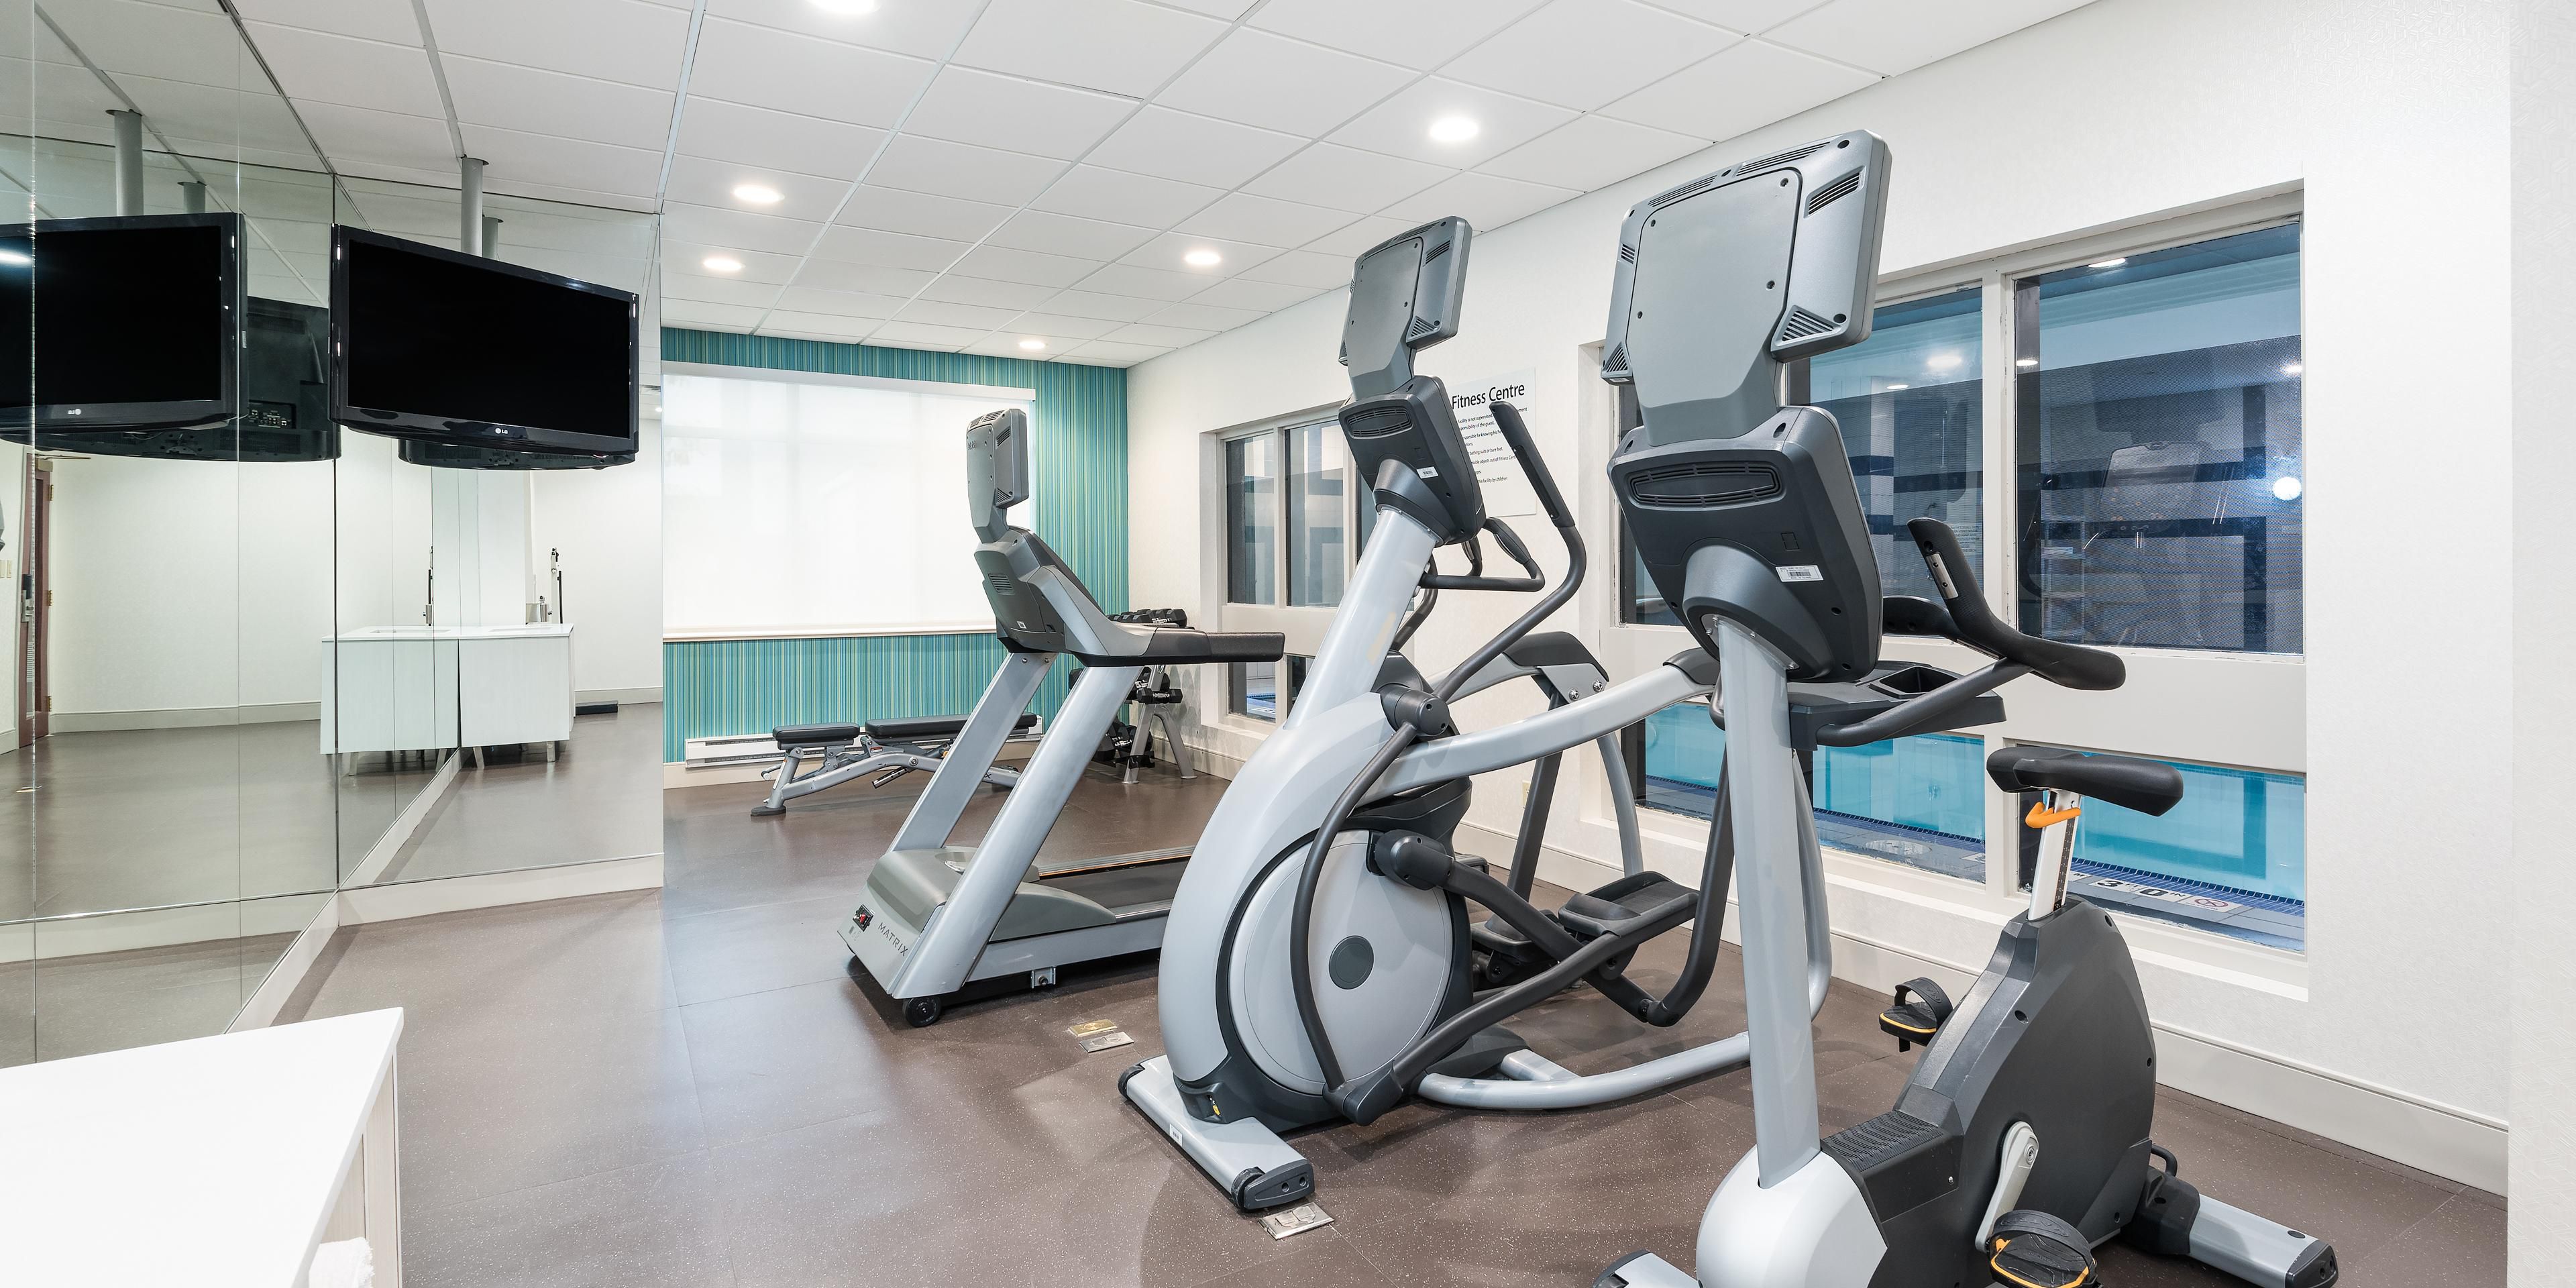 Fitness Centre is now open from 7AM to 11PM to keep you fit while away from home. Limited number of guests are allowed and first come, first served basis.